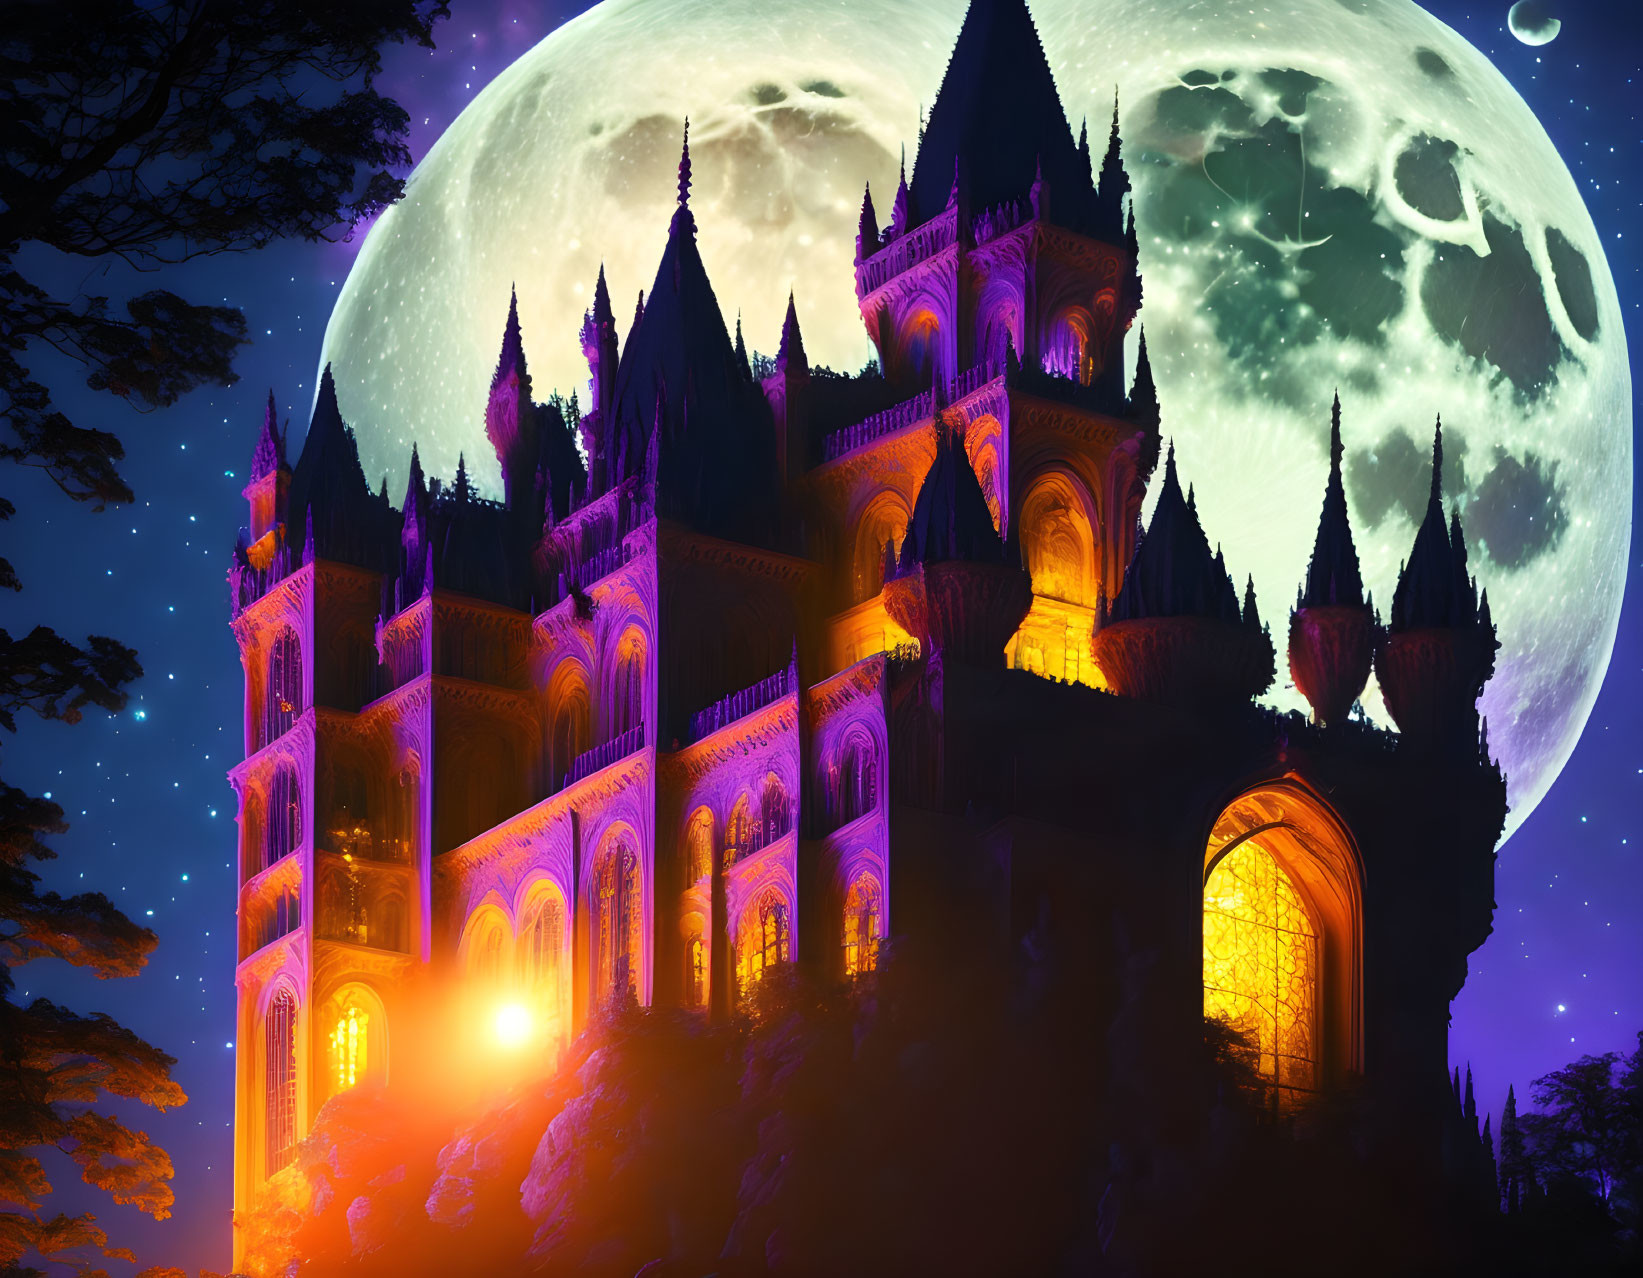 Gothic castle under warm light with detailed moon and silhouetted trees